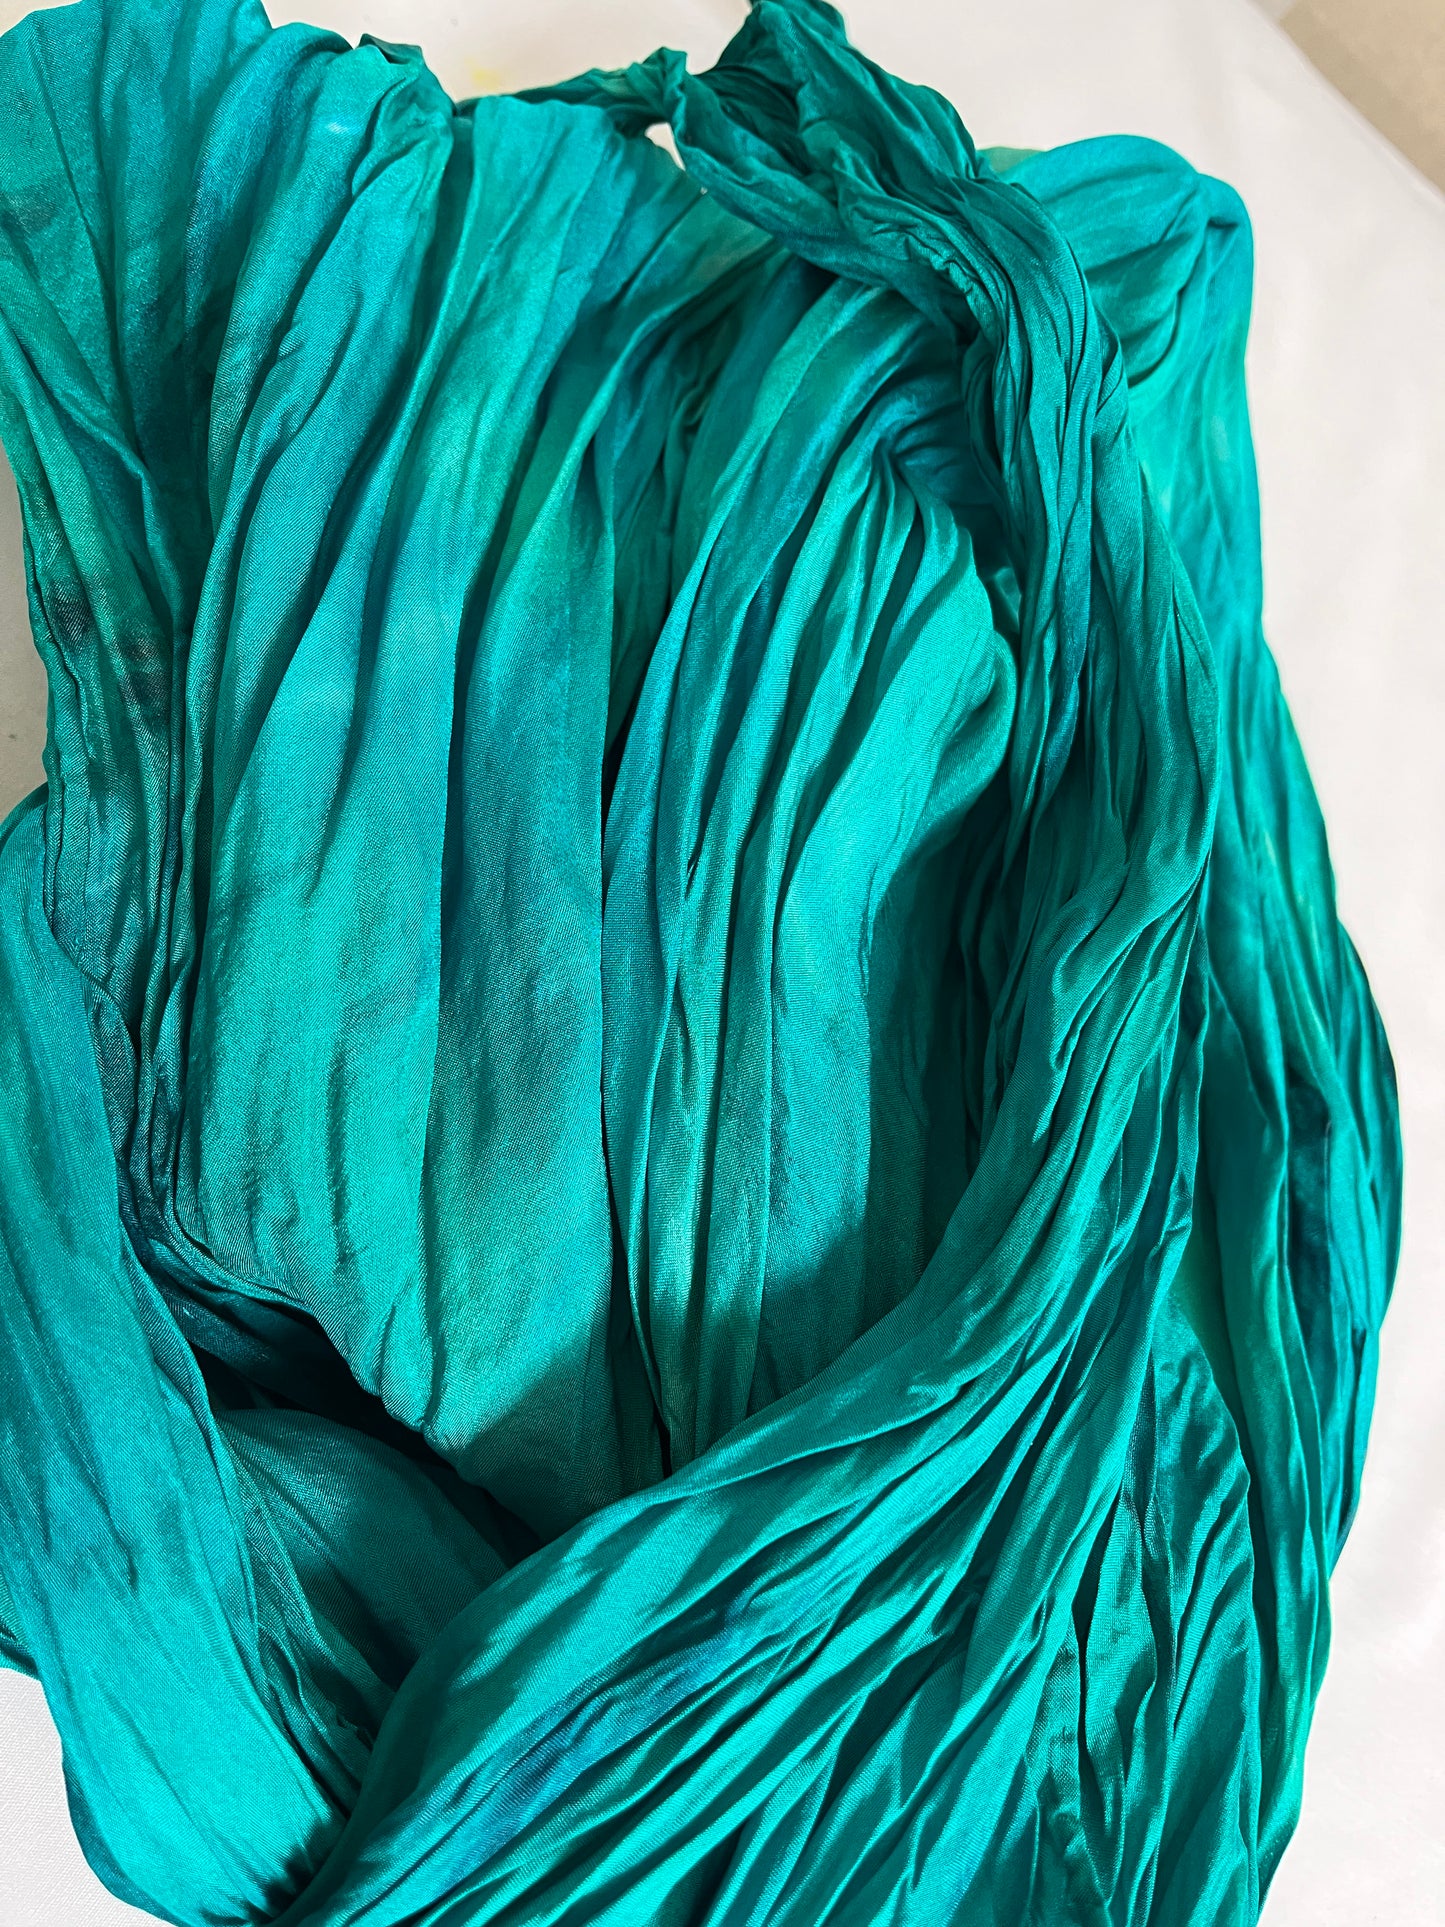 The “Activity Scarf” Green - hand-dyed silk scarf - $125